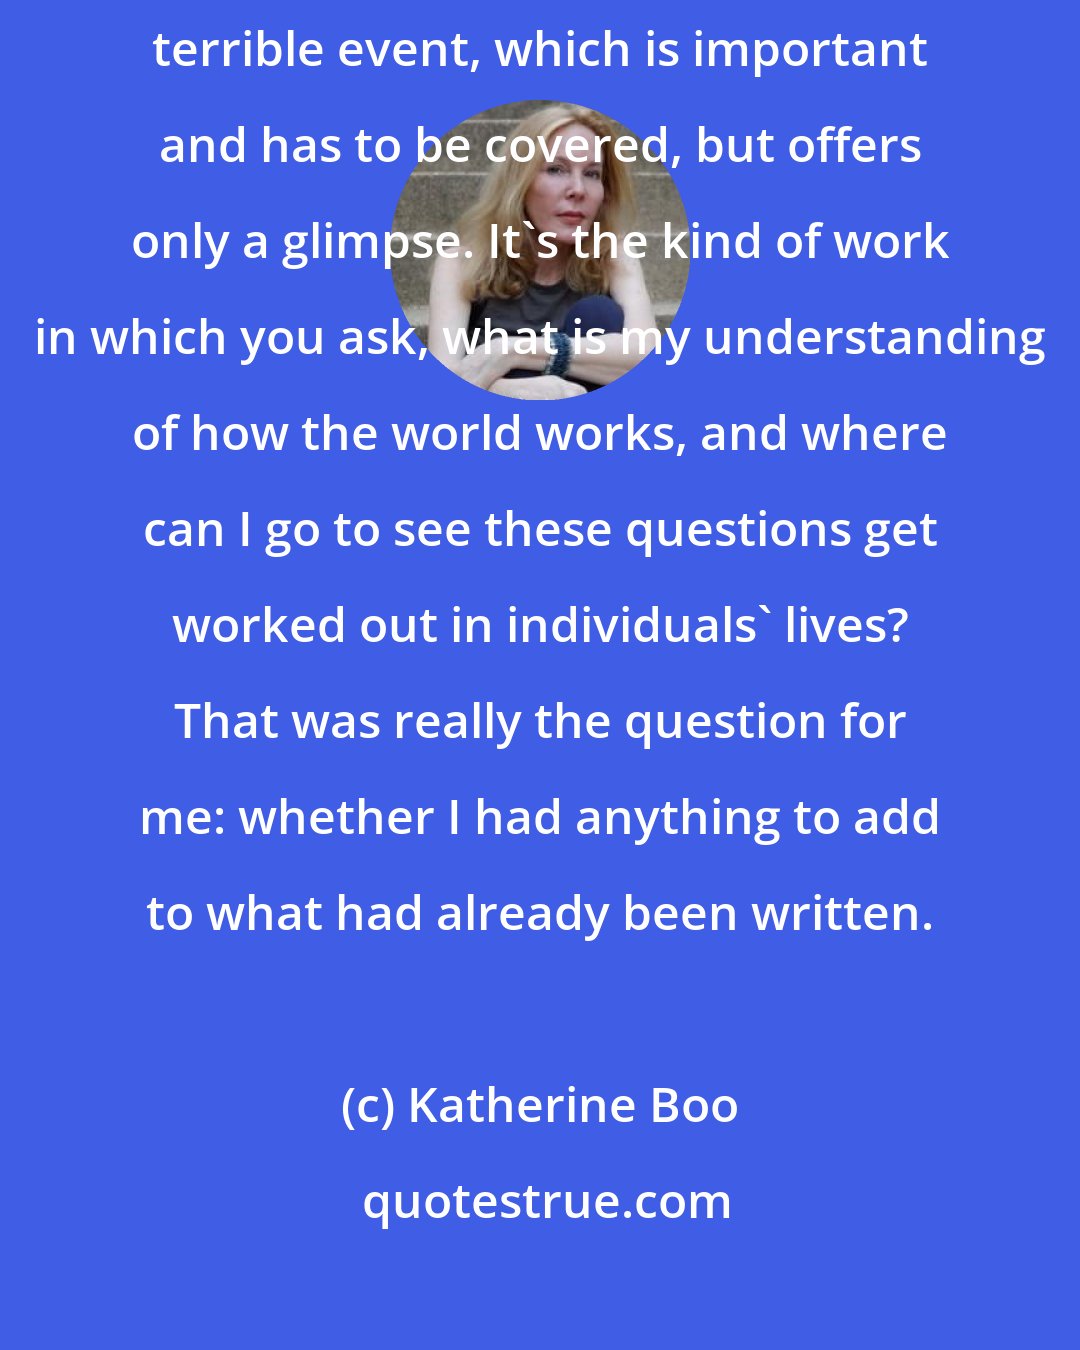 Katherine Boo: In my kind of reporting work, you don't parachute in after some big, terrible event, which is important and has to be covered, but offers only a glimpse. It's the kind of work in which you ask, what is my understanding of how the world works, and where can I go to see these questions get worked out in individuals' lives? That was really the question for me: whether I had anything to add to what had already been written.